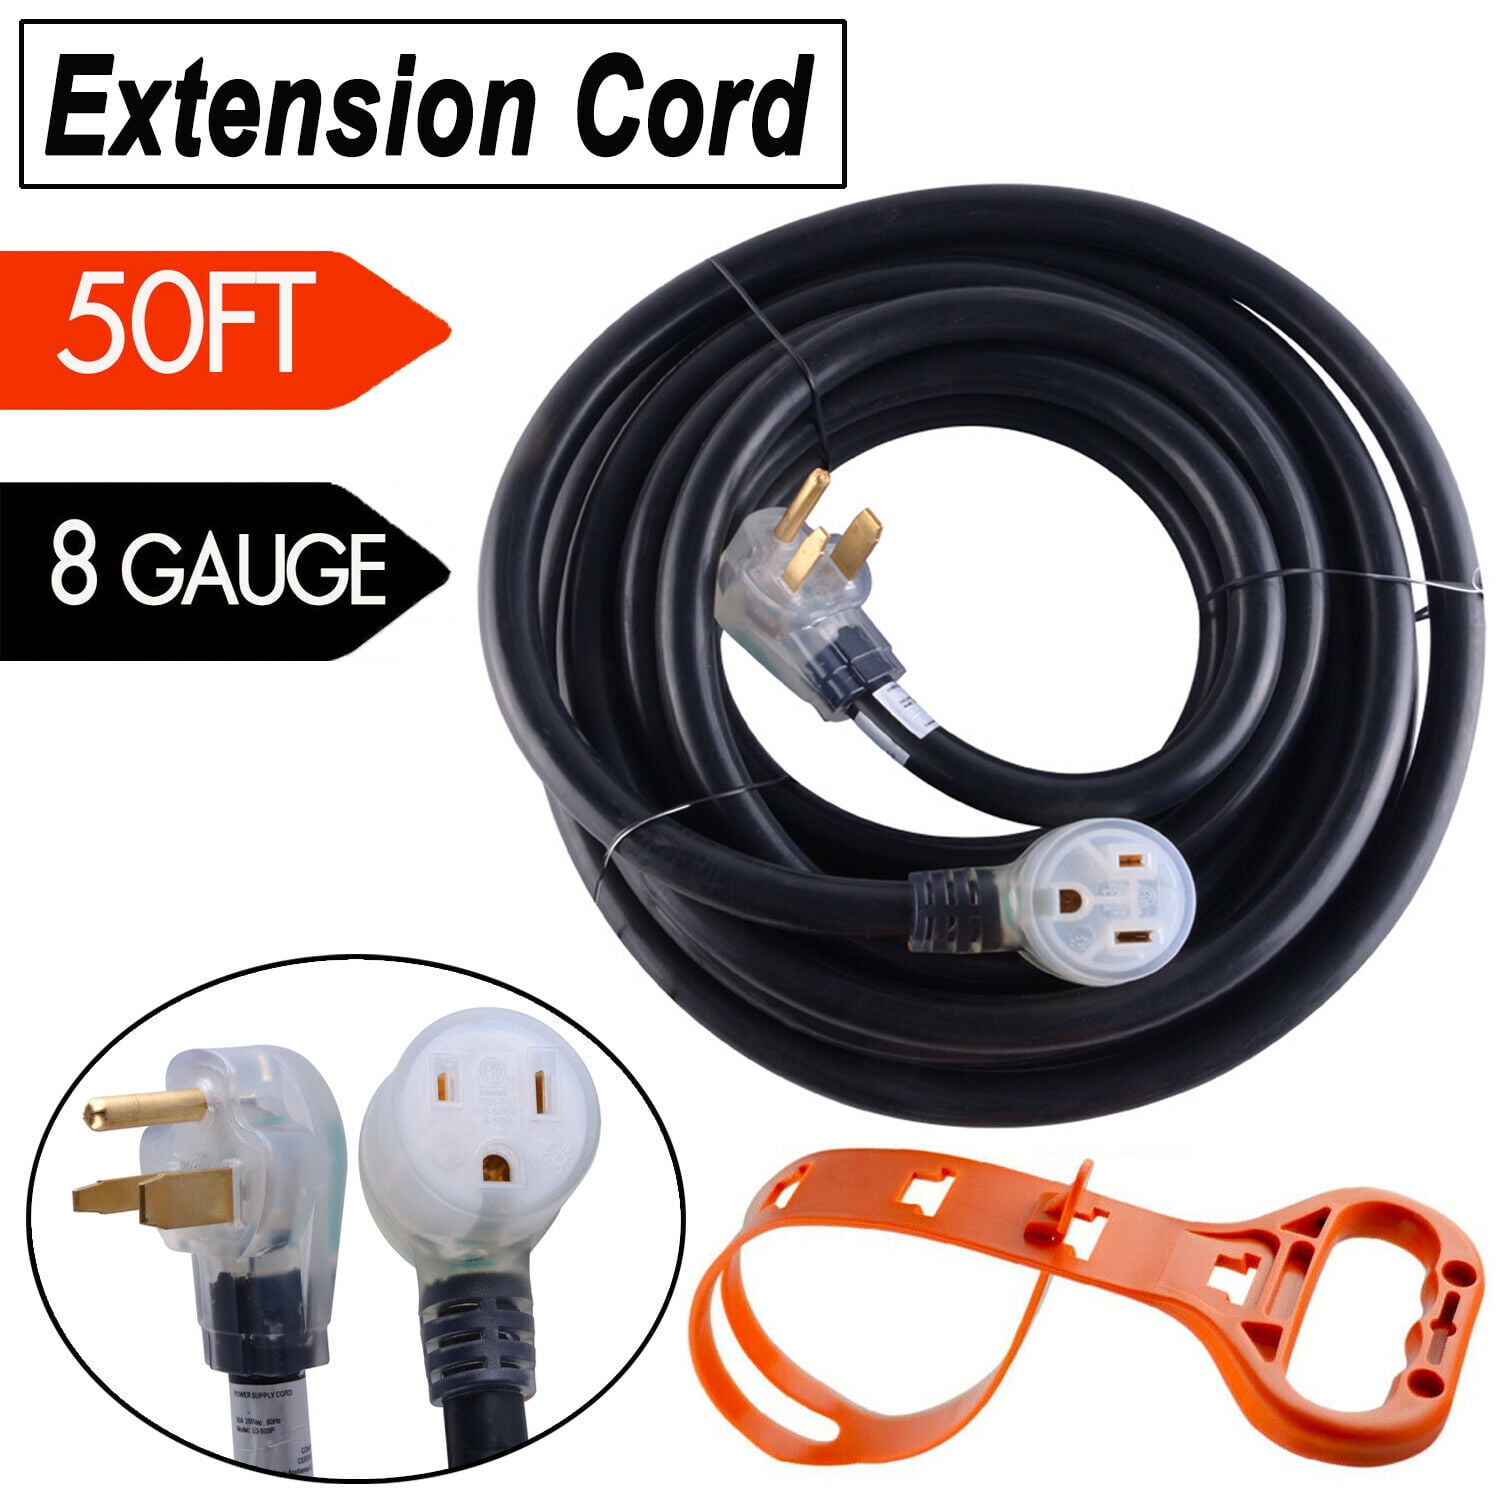 25 ft iMeshbean Heavy Duty Welder Extension Cord 250V 8 AWG/3C 6-50 Nema R Plug Lighted Welding Cord Copper Wire ETL Approved with Organizer Handle for MIG TIG Plasma Welding